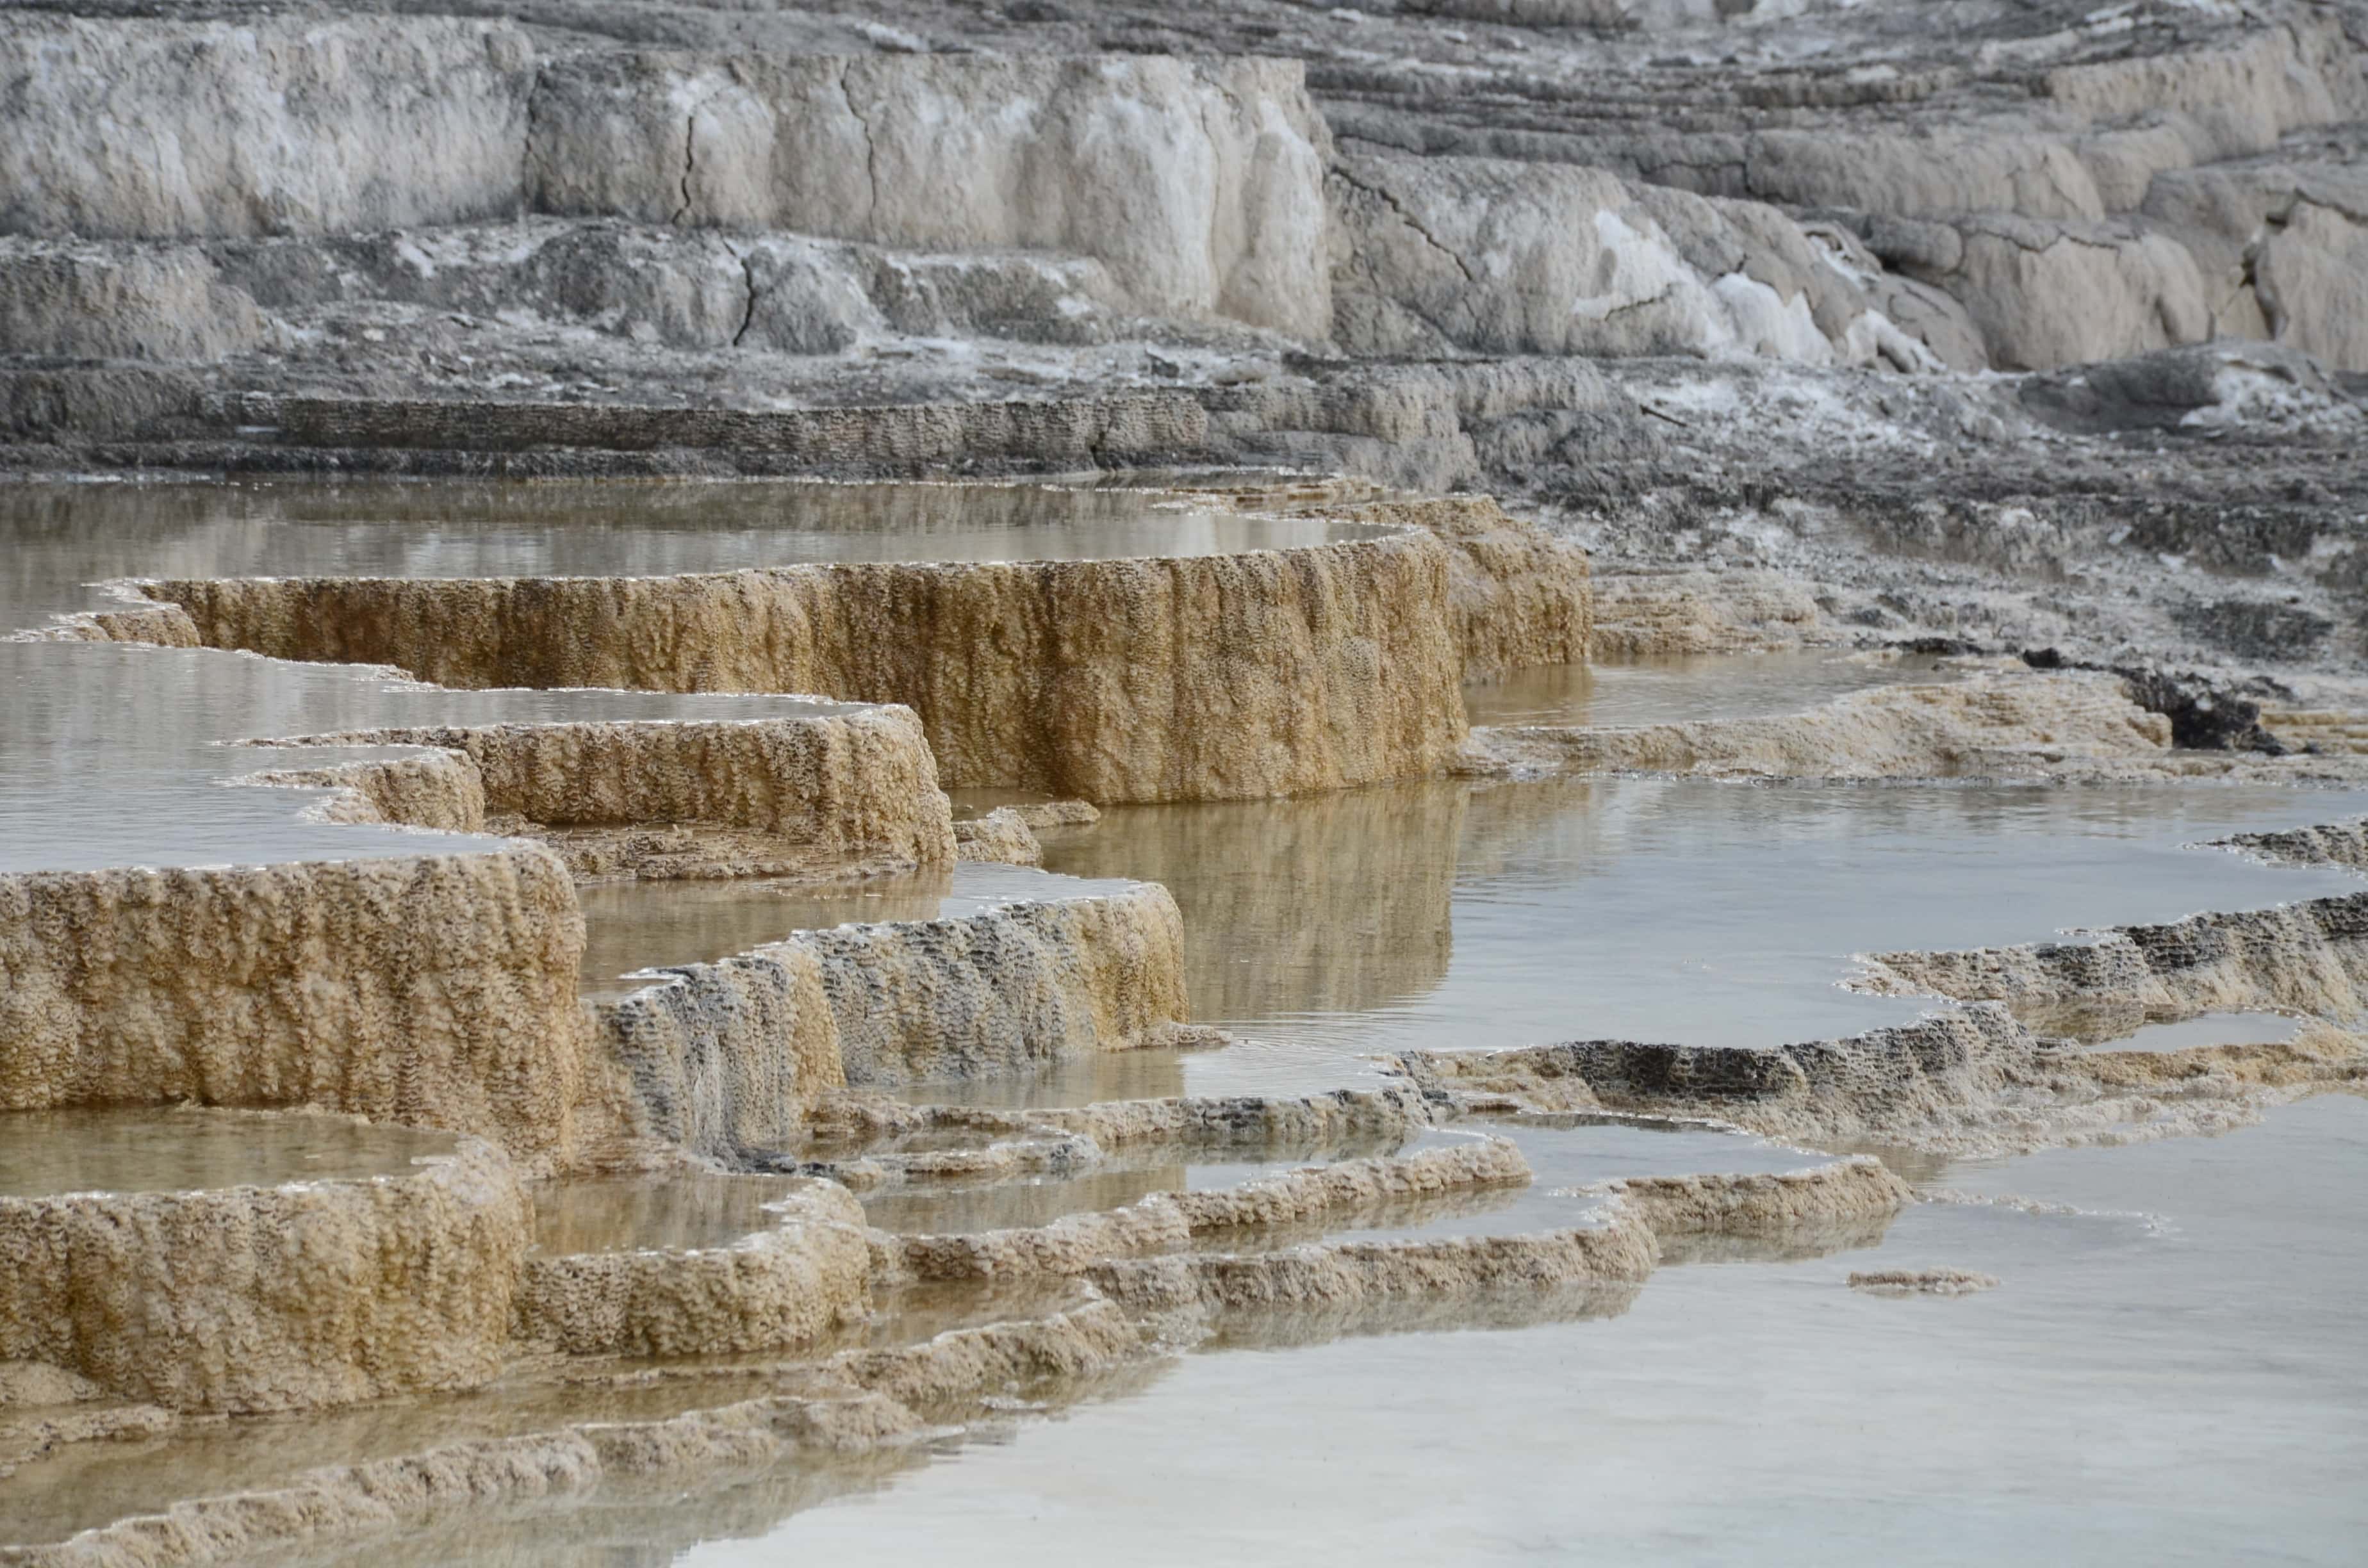 Main Terrace at Mammoth Hot Springs in Yellowstone National Park, Wyoming